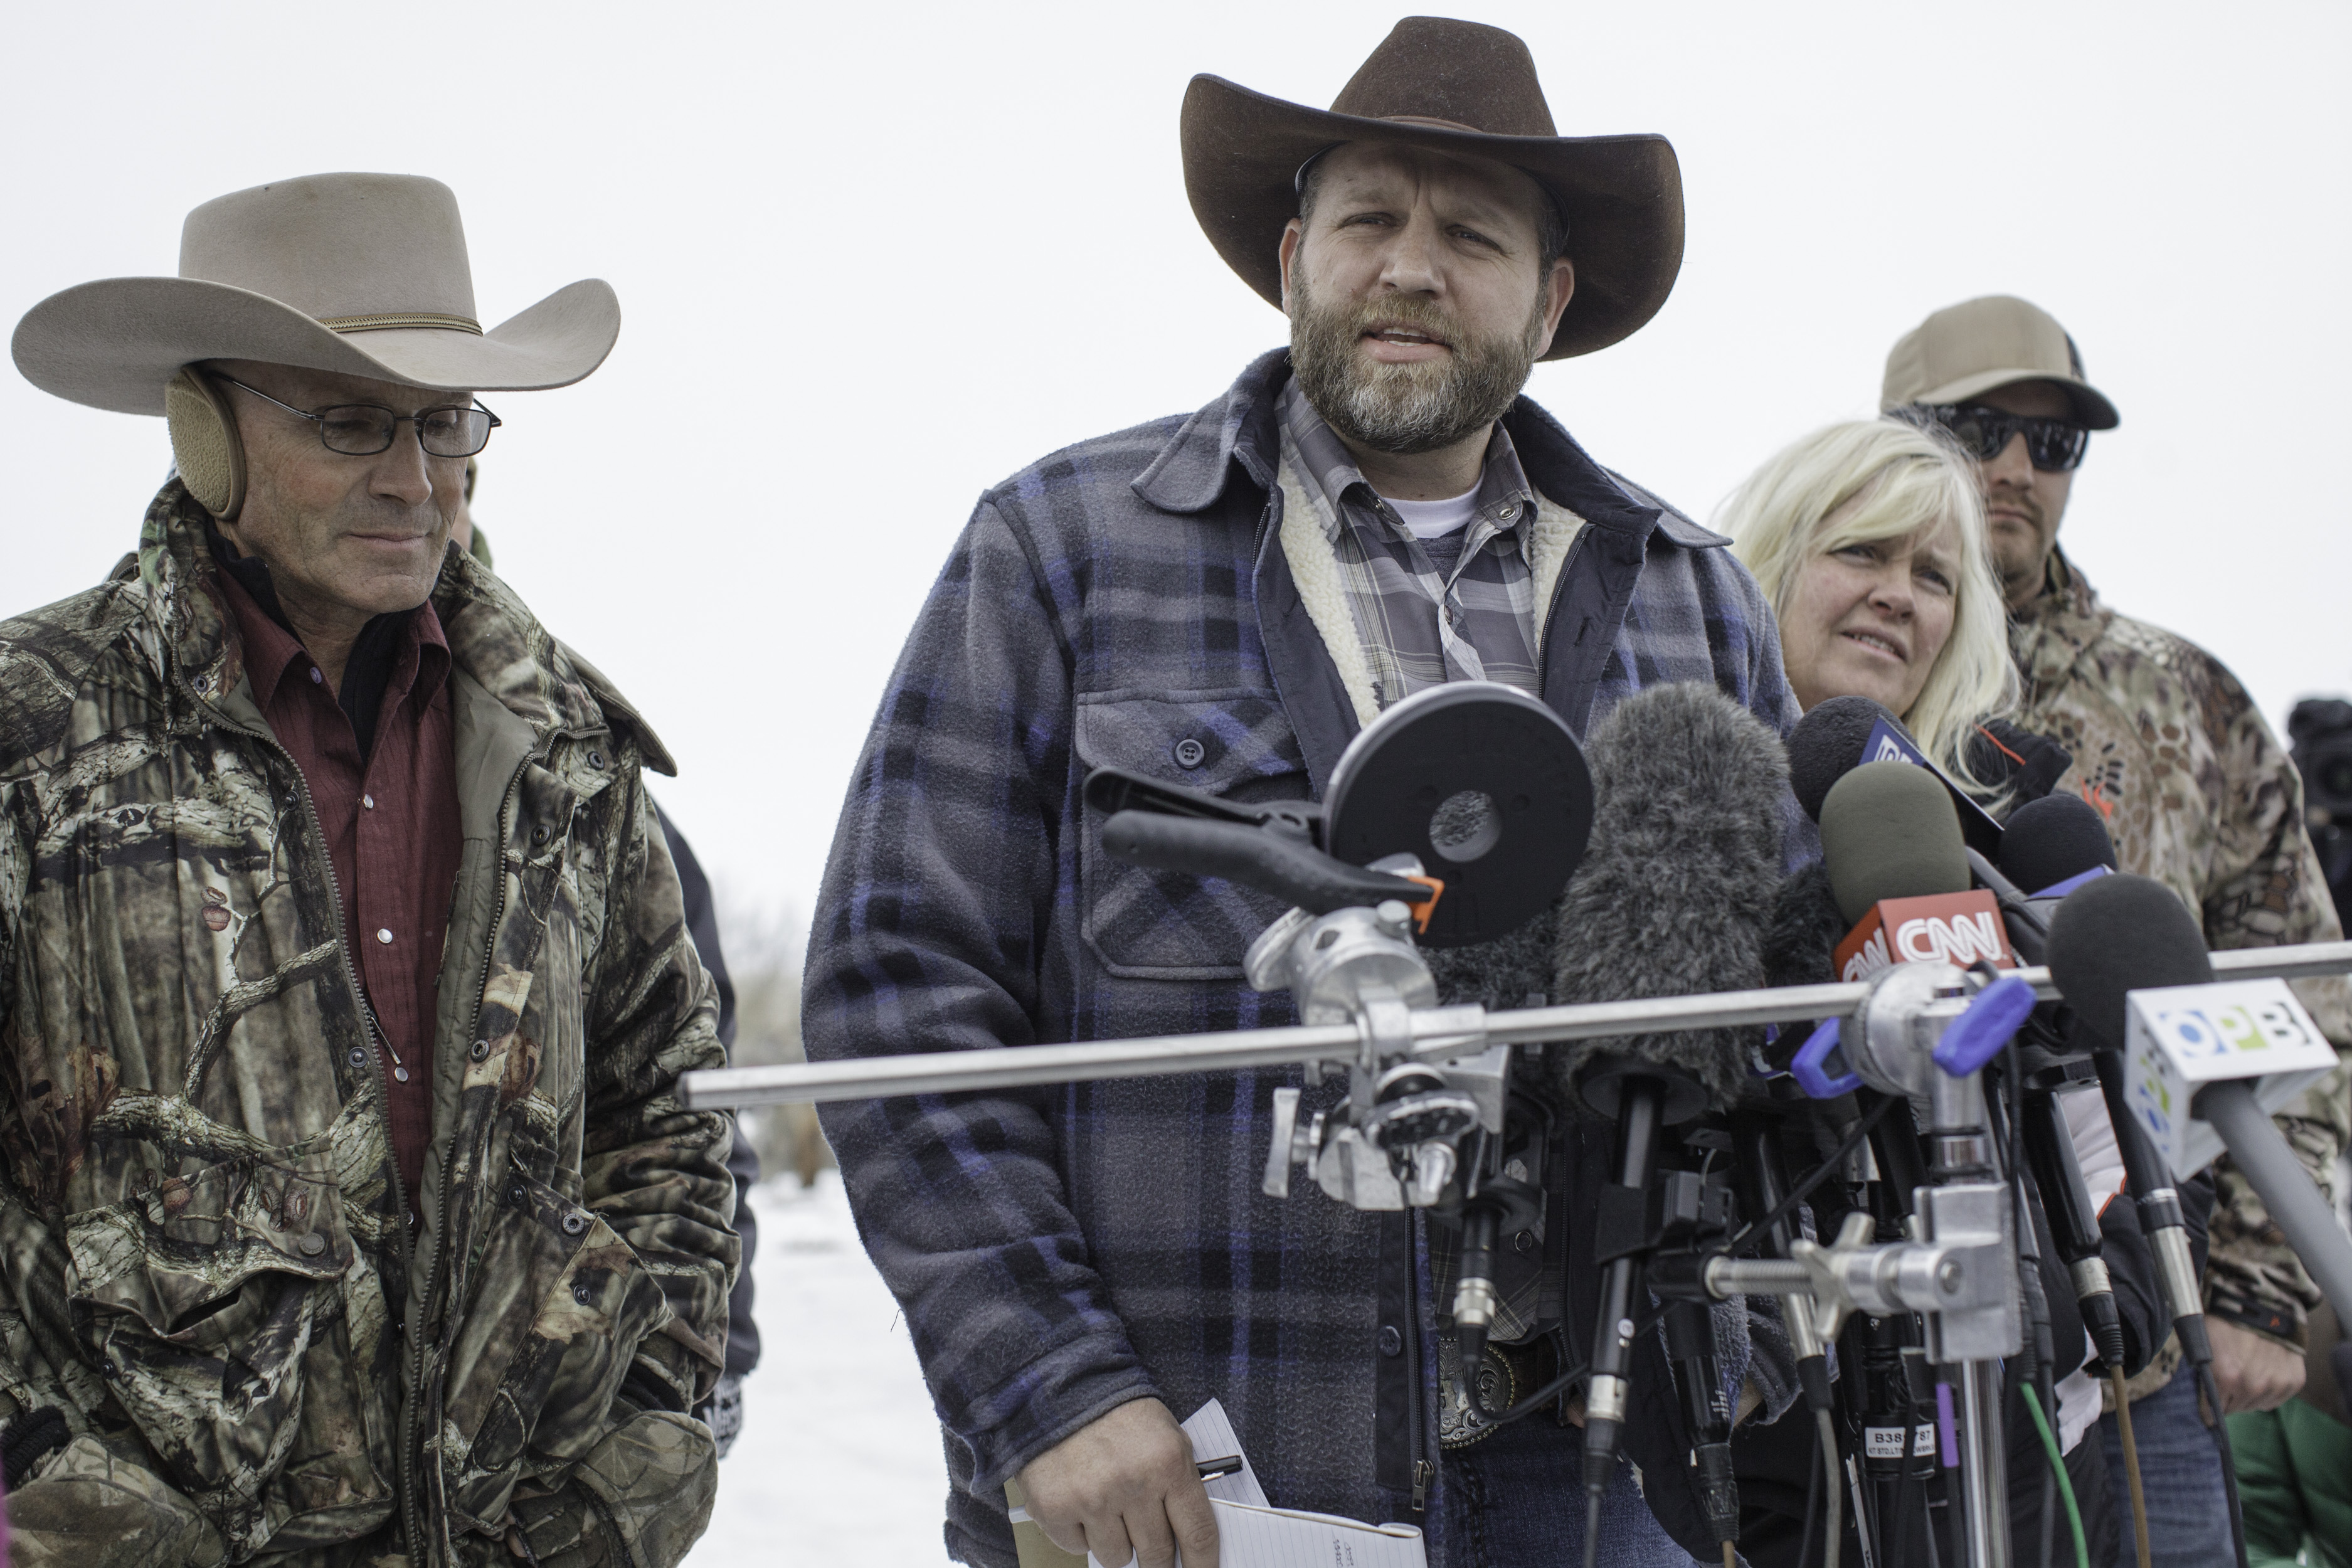 Ammon Bundy (C), leader of an armed anti-government militia, makes a statement at a news conference at the Malheur National Wildlife Refuge Headquarters near Burns, Ore., on Jan. 5, 2016. (Rob Kerr—AFP/Getty Images)